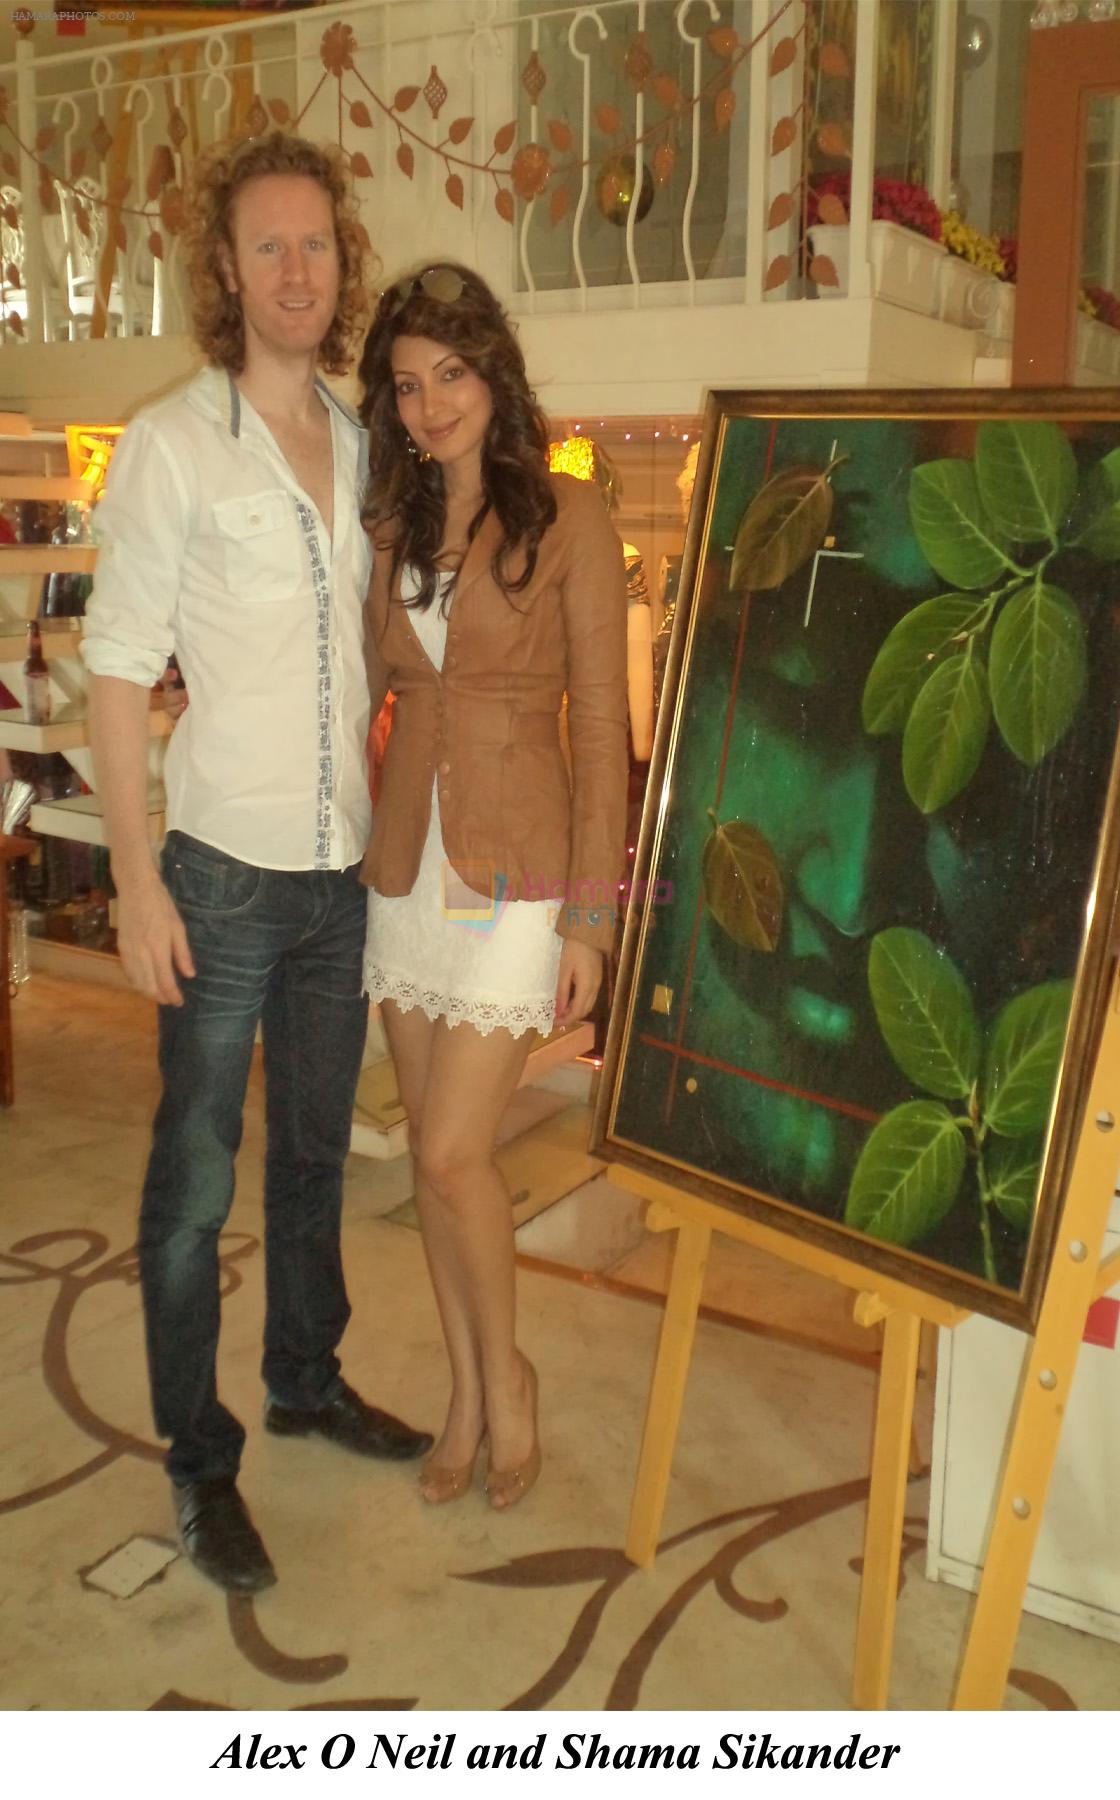 Alex O Neil and Shama Sikander at the Art and Fashion Brunch in The Wedding Cafe n Lounge on 22nd Jan 2012